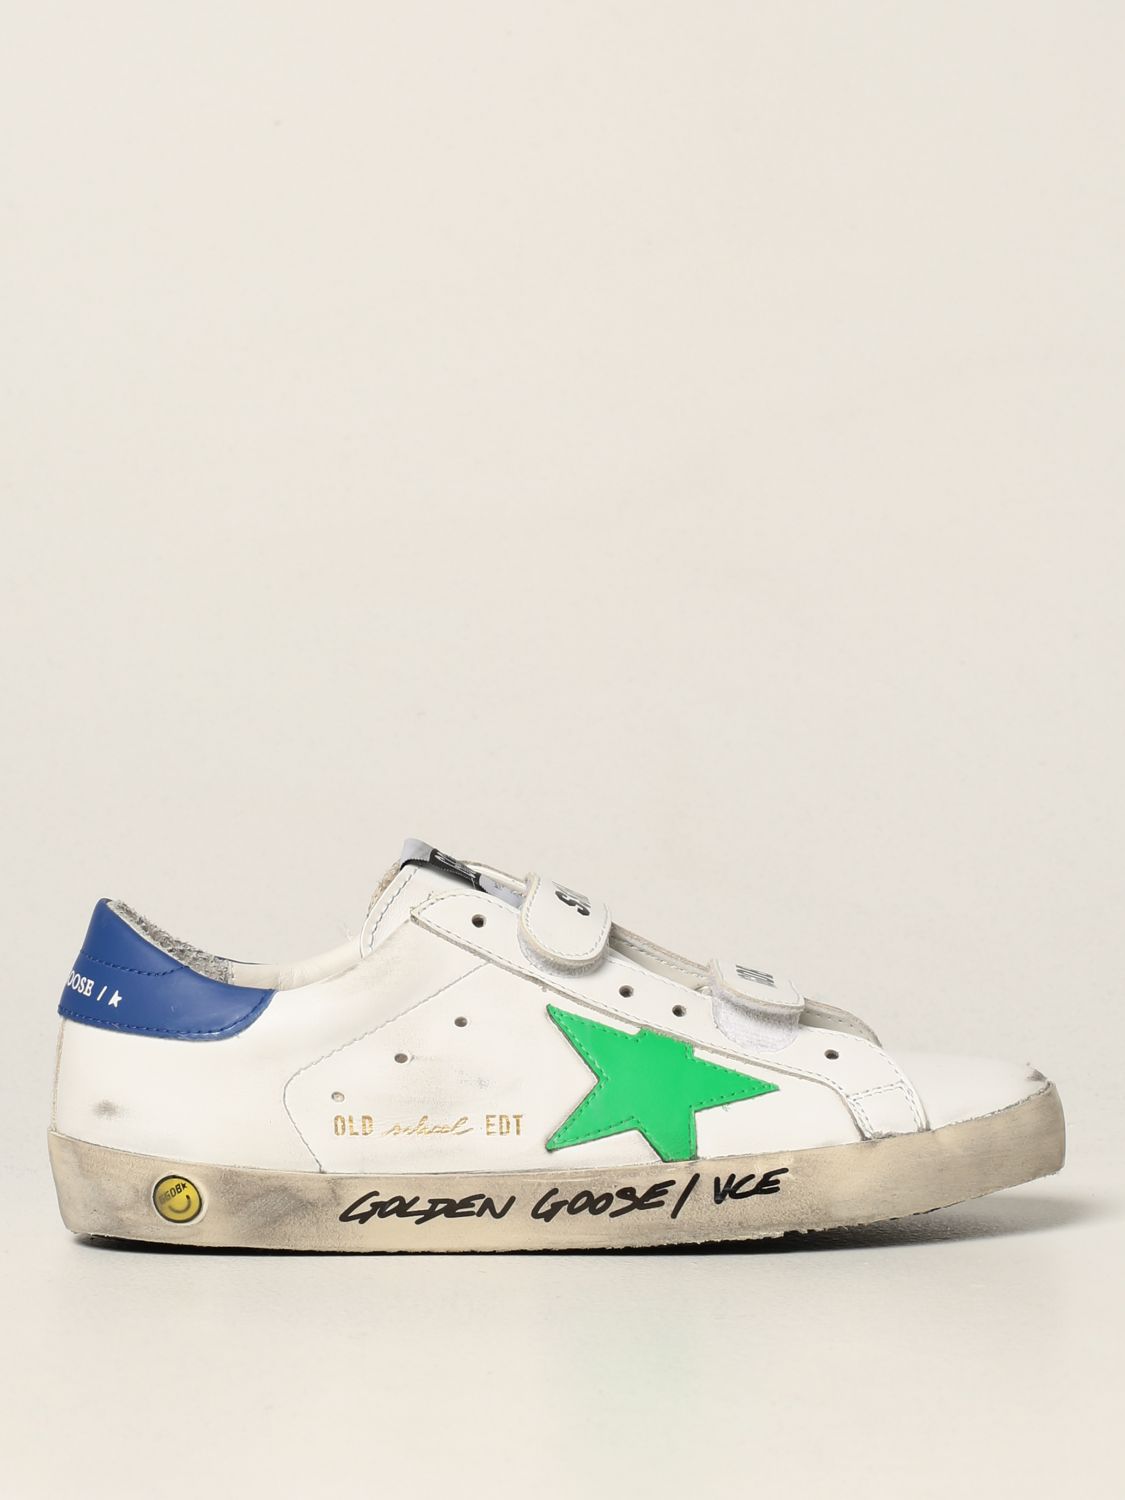 GOLDEN GOOSE: School sneakers in leather - White | Golden Goose shoes GTF00111.F001980.10755 online